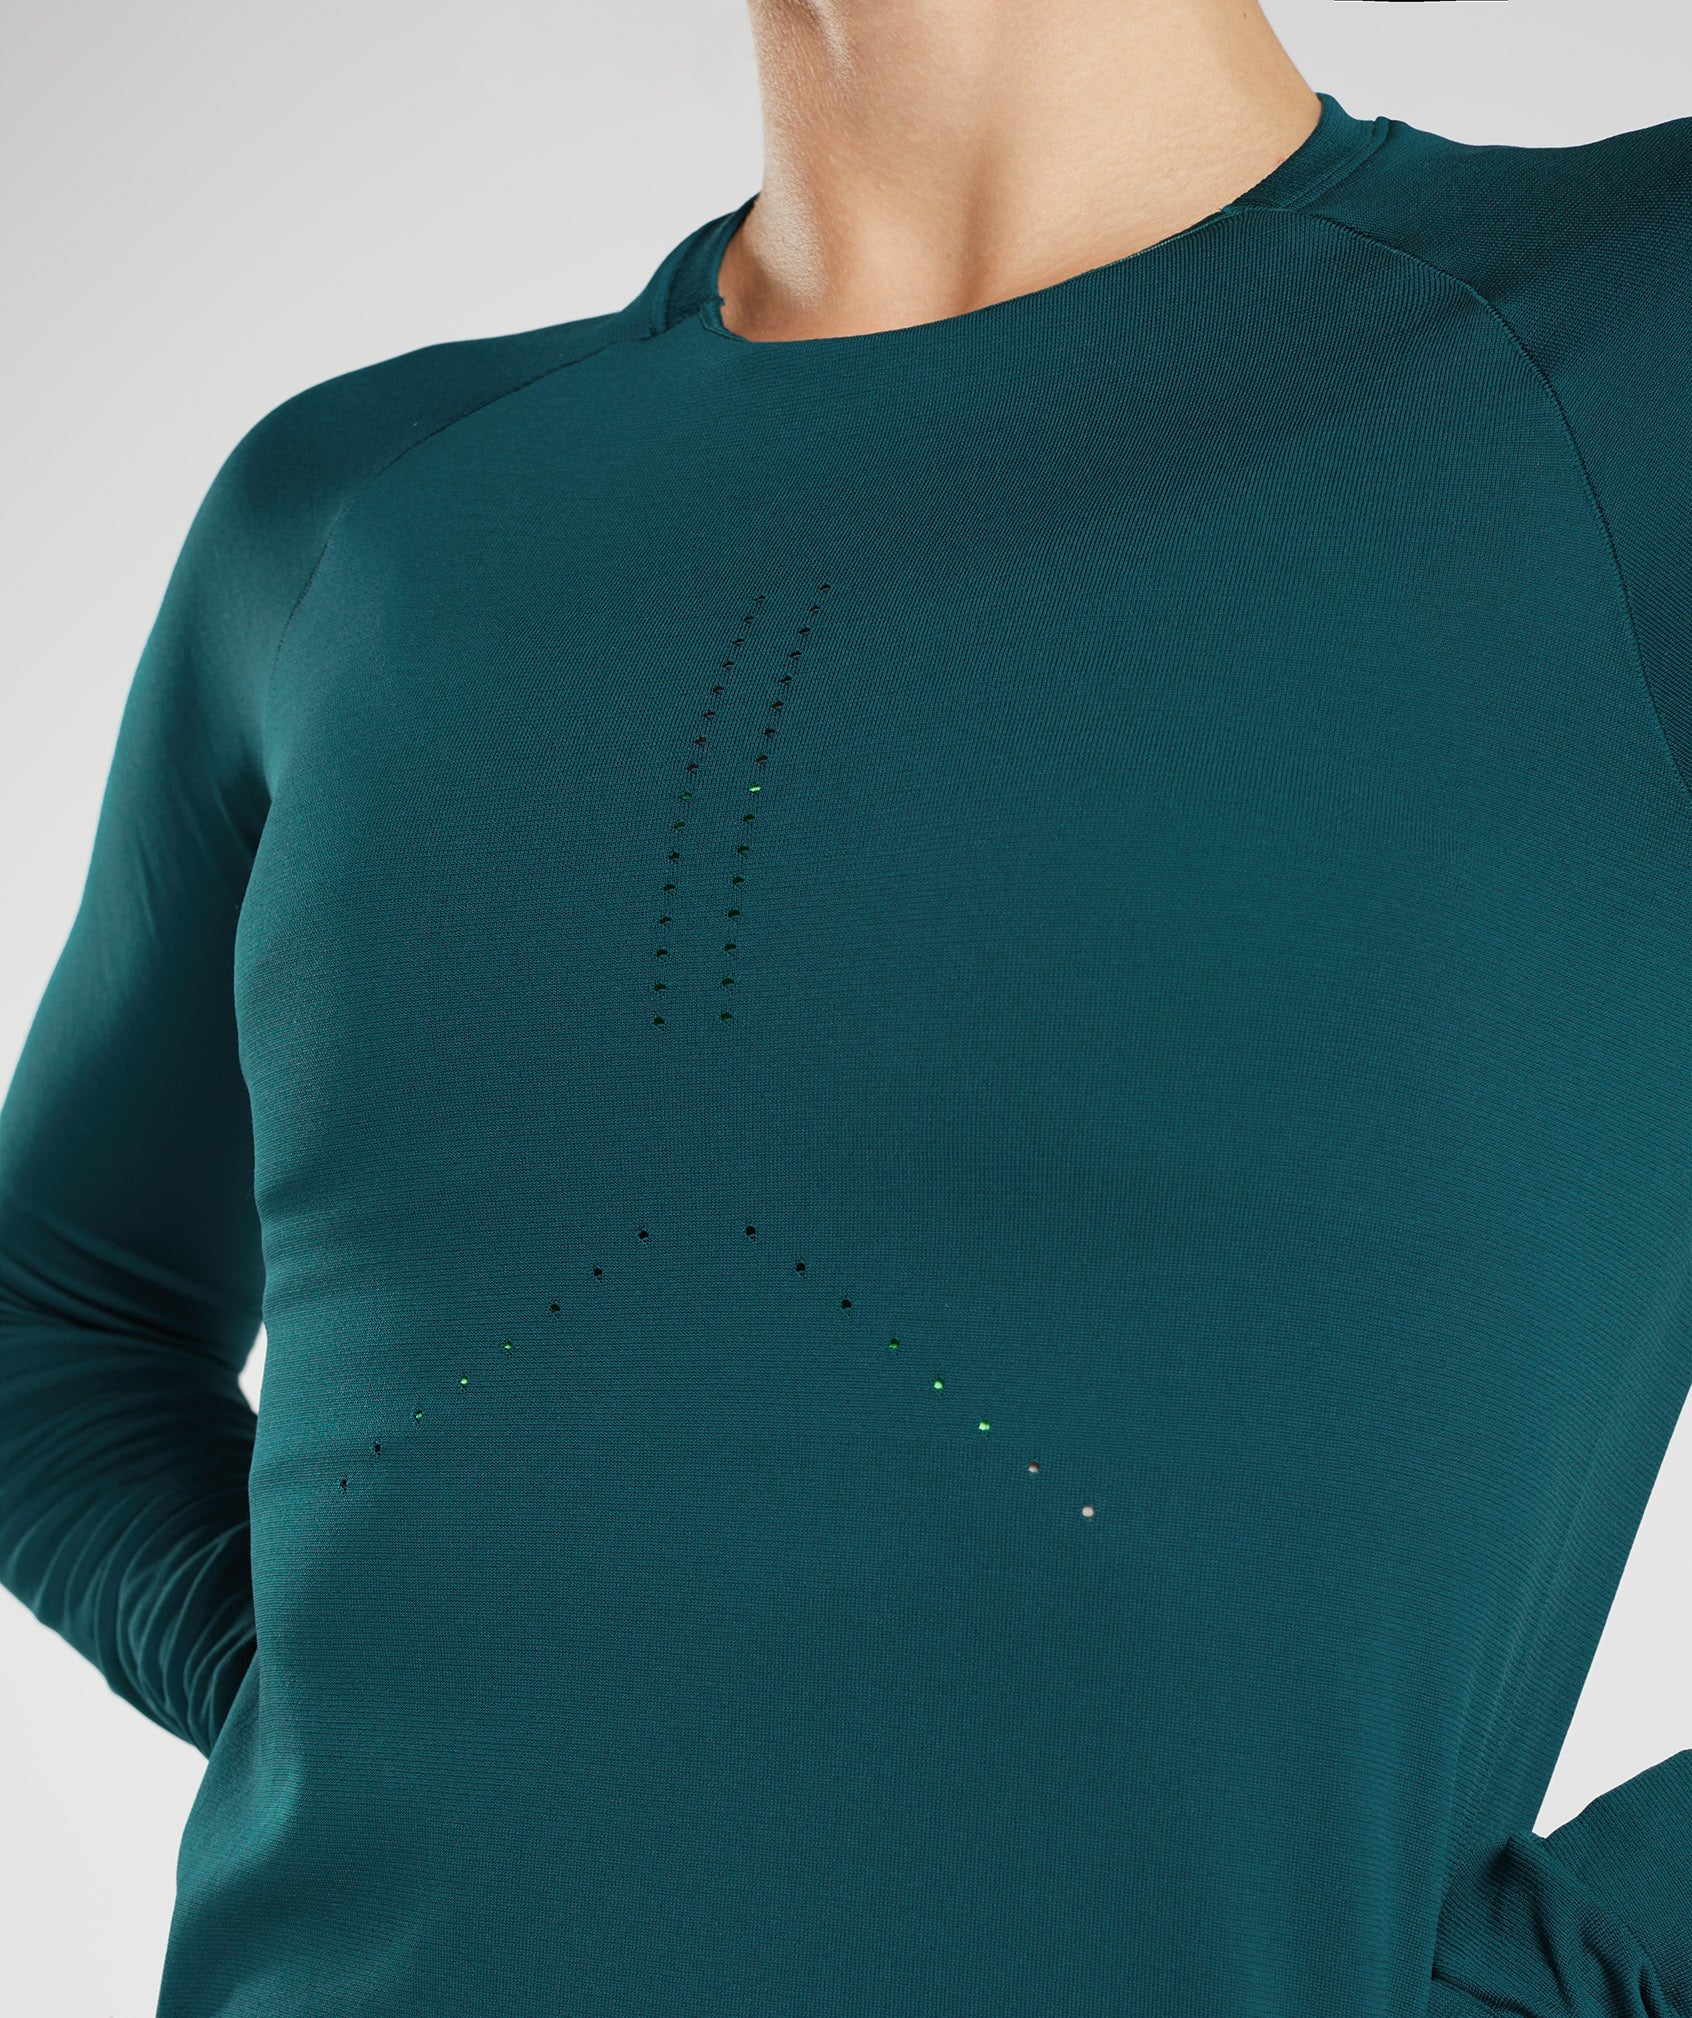 Sweat Seamless Long Sleeve Top in Winter Teal - view 6